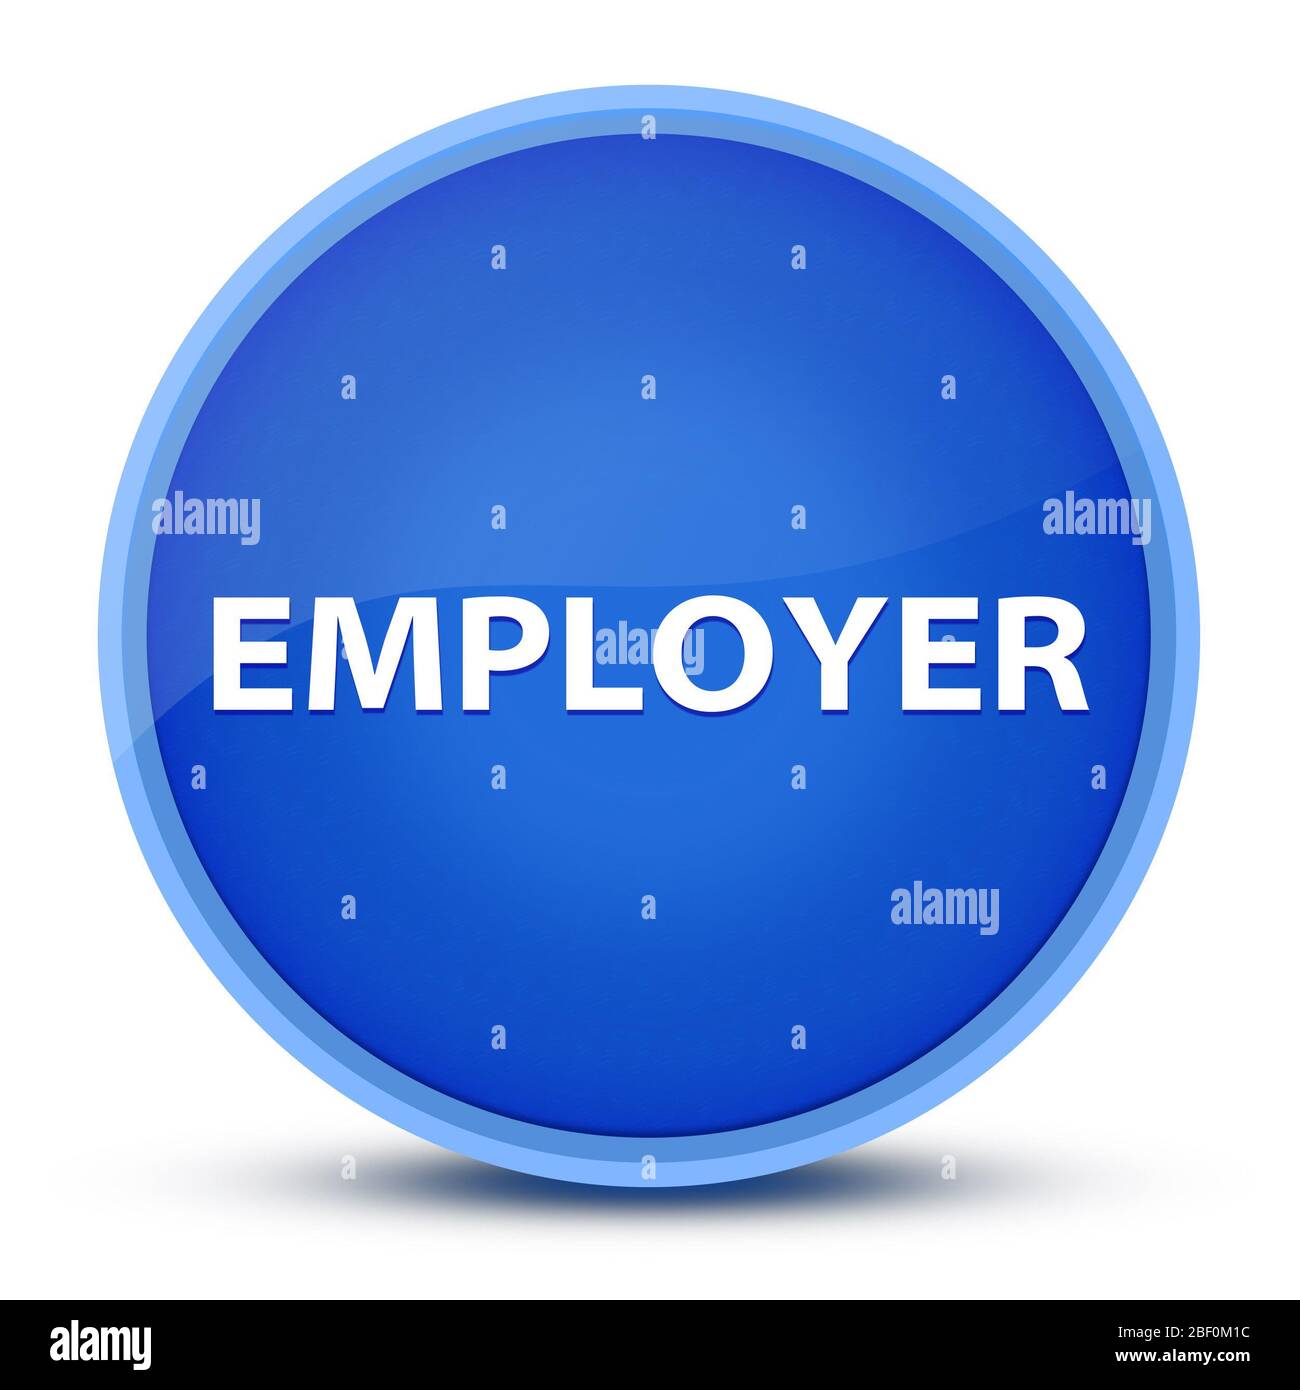 Employer isolated on special blue round button abstract illustration Stock Photo